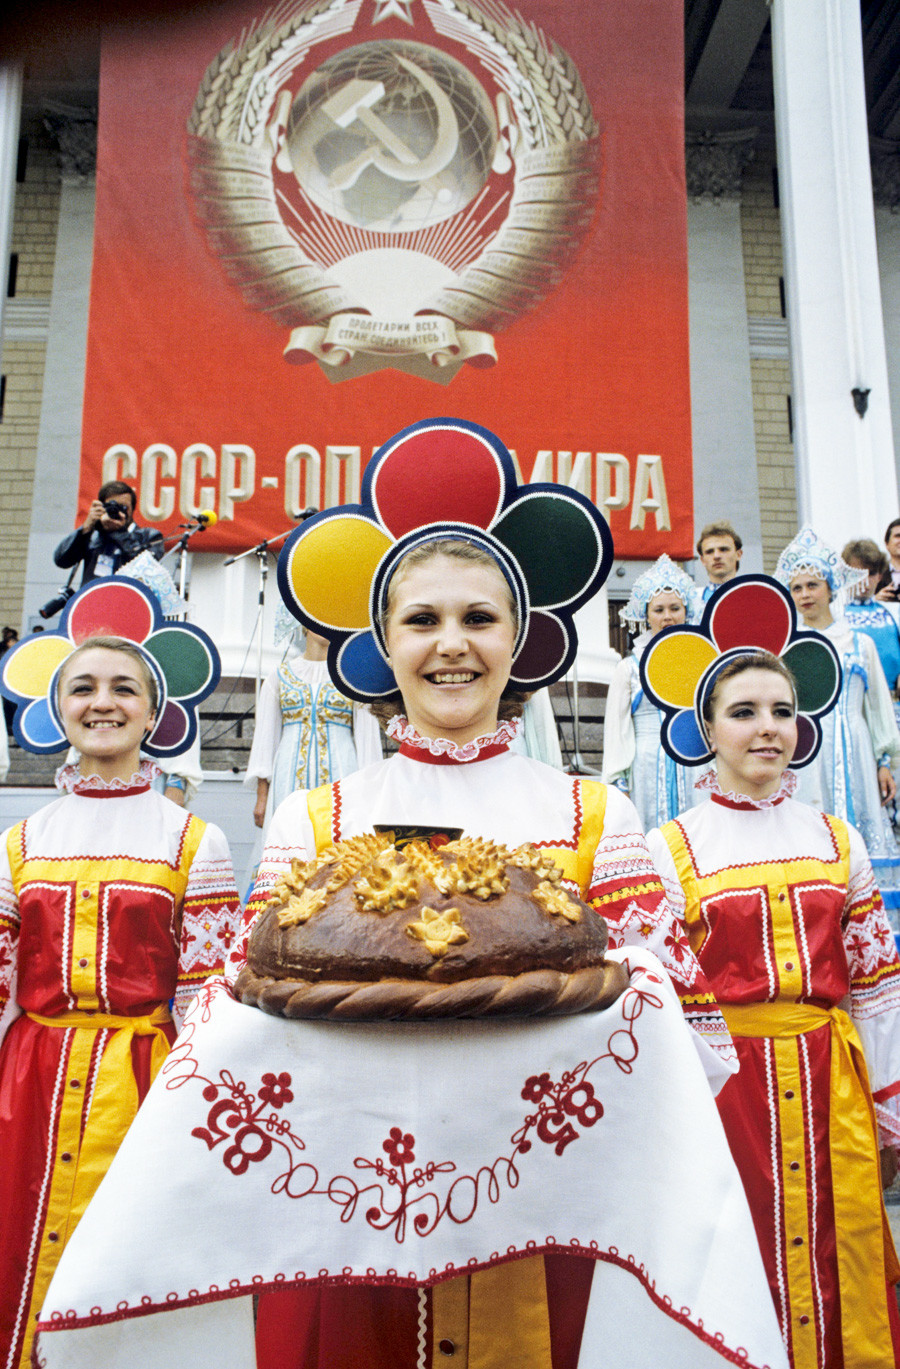 Opening the USSR delegation club at12th World Festival of Youth and Students. Greeting the participants with bread and salt, 1985.